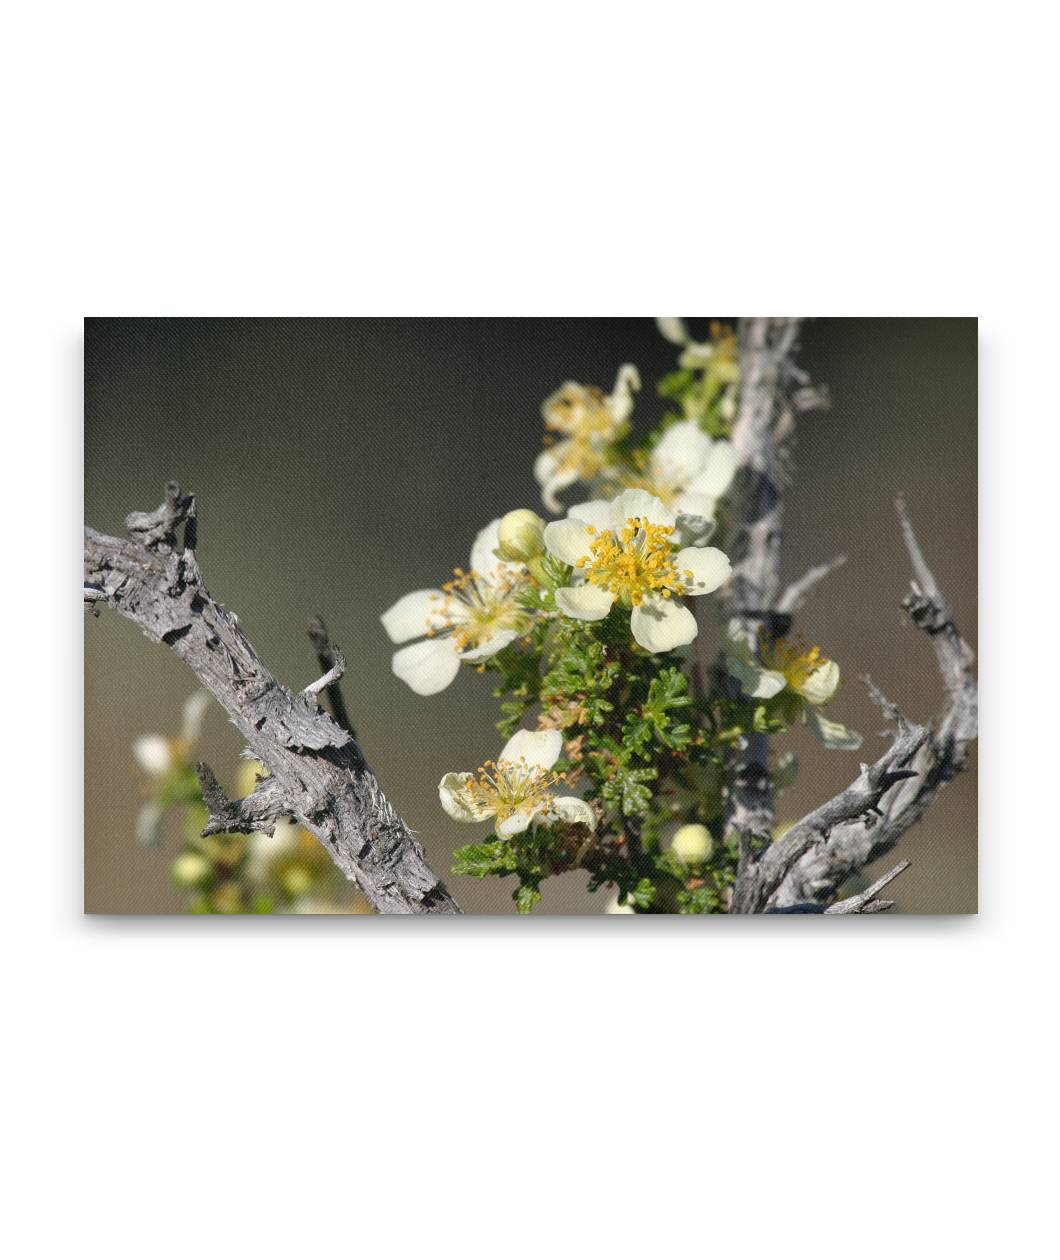 Flowering Mexican cliffrose, Great Basin National Park, Nevada